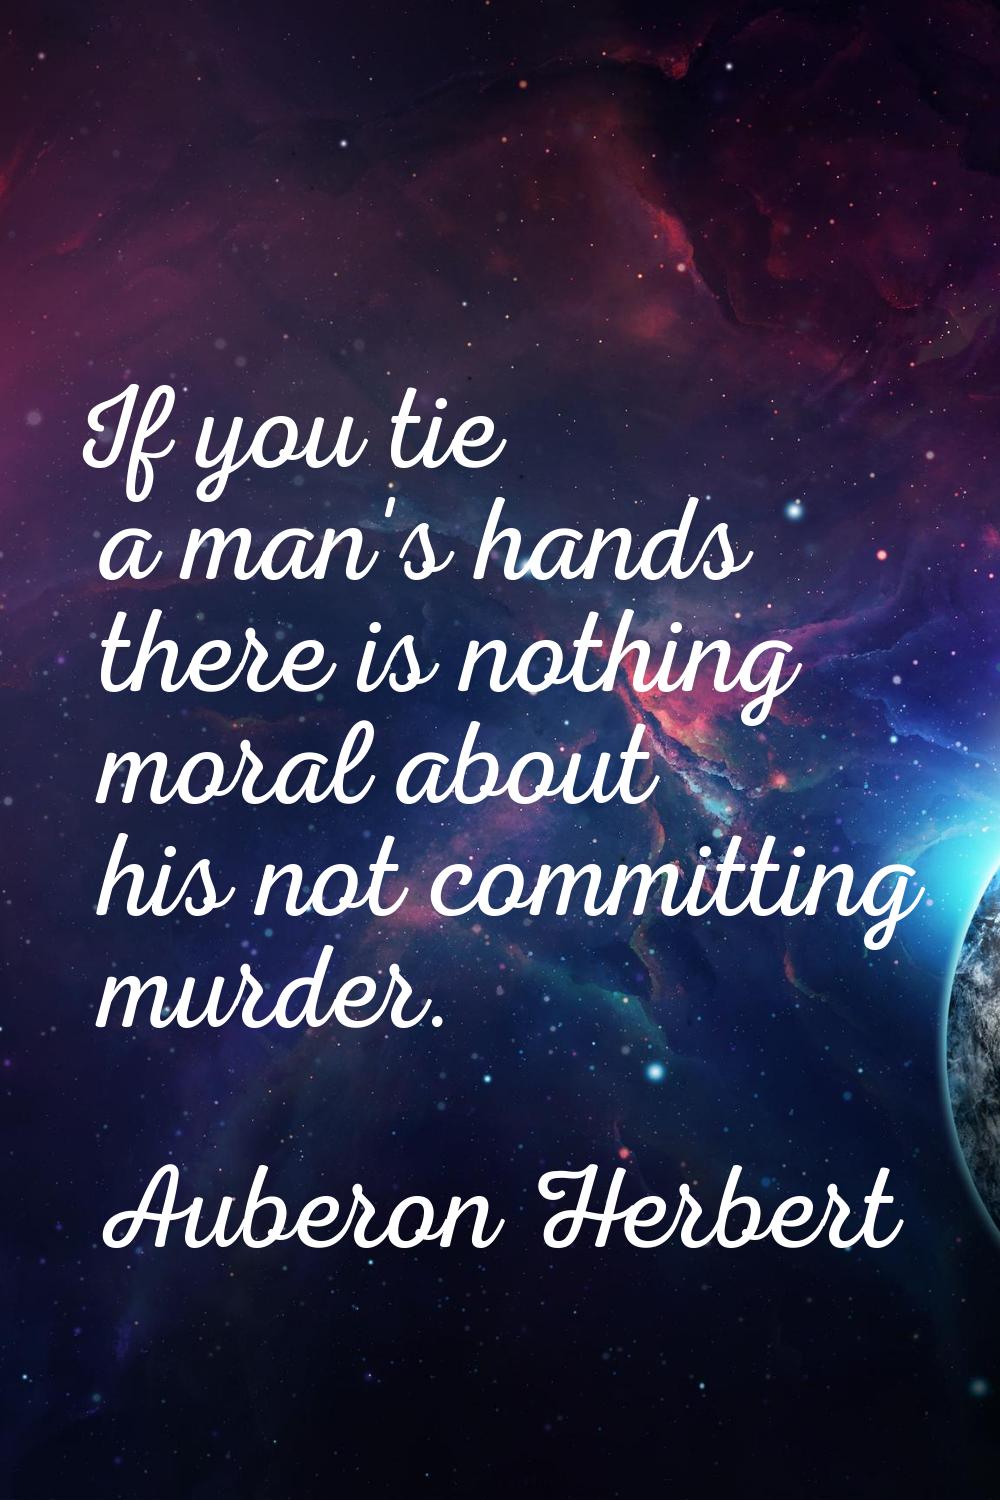 If you tie a man's hands there is nothing moral about his not committing murder.